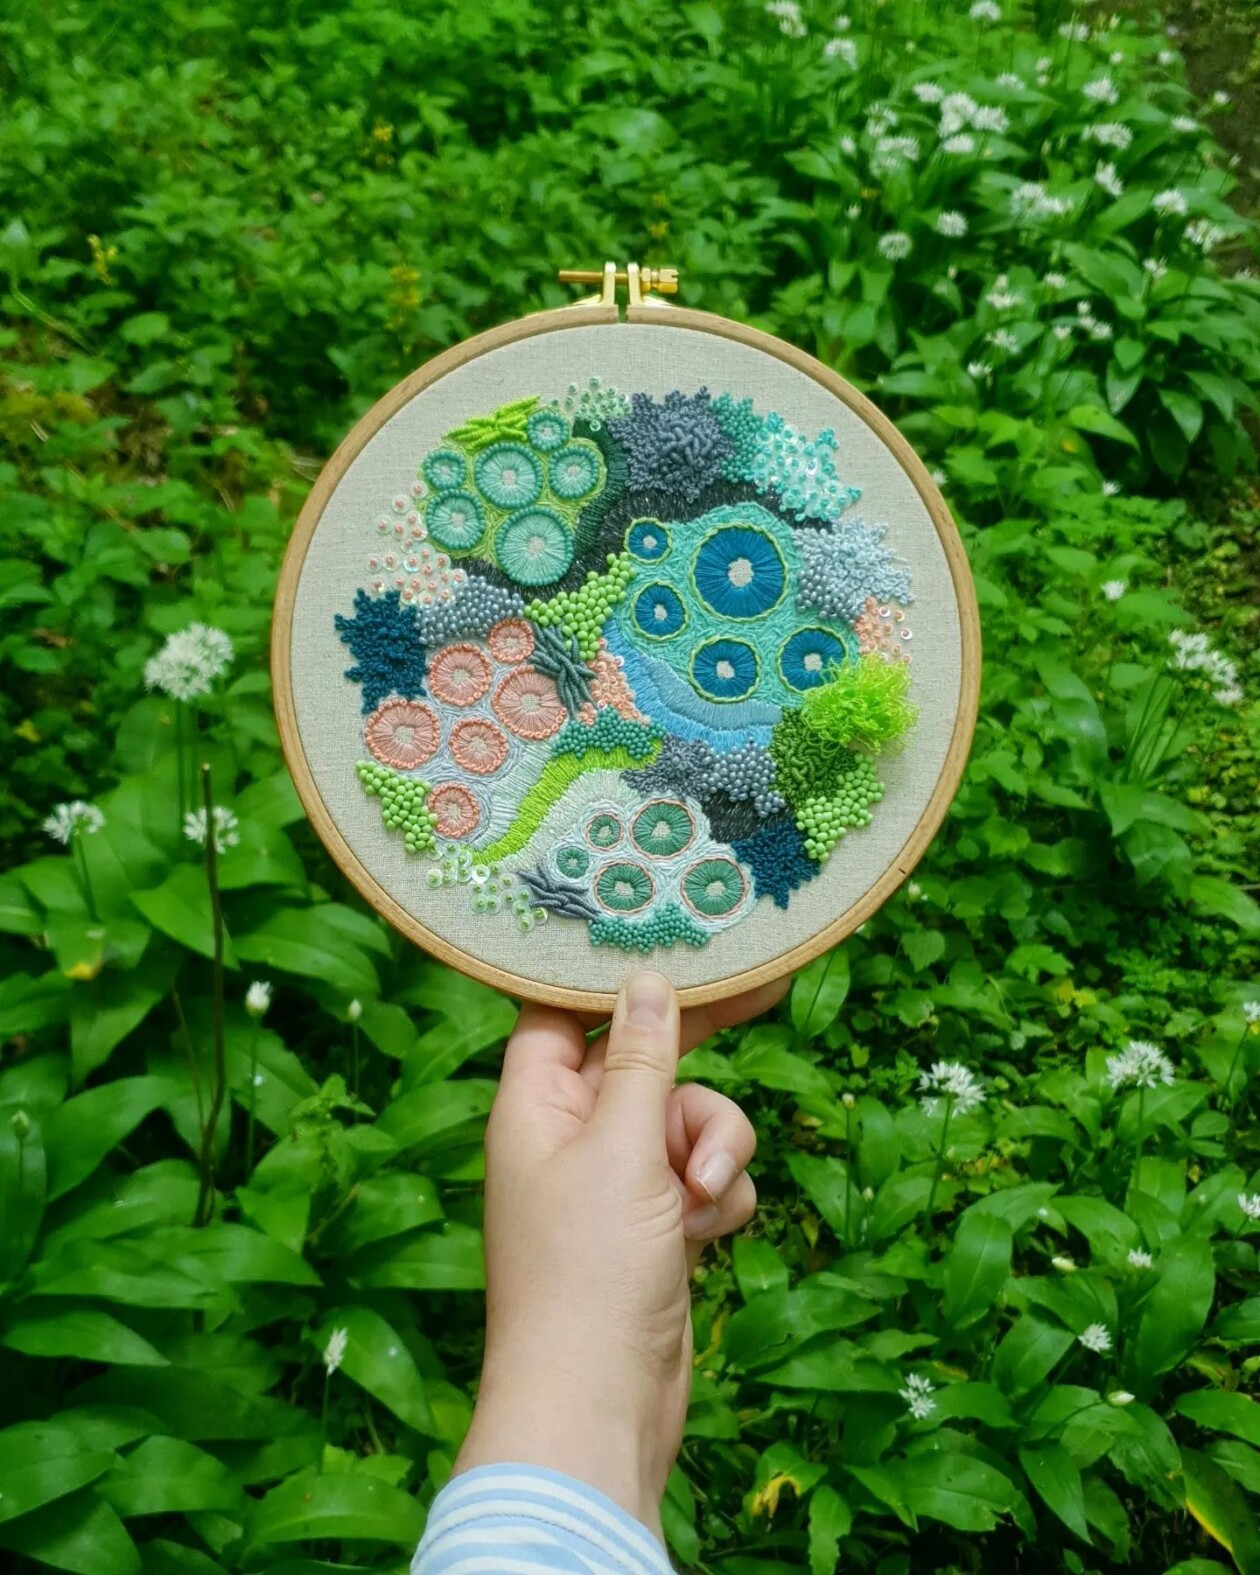 Marvelous Embroideries Inspired By Moss, Coral, And Lichen Forms By Hannah Kwasnycia (1)